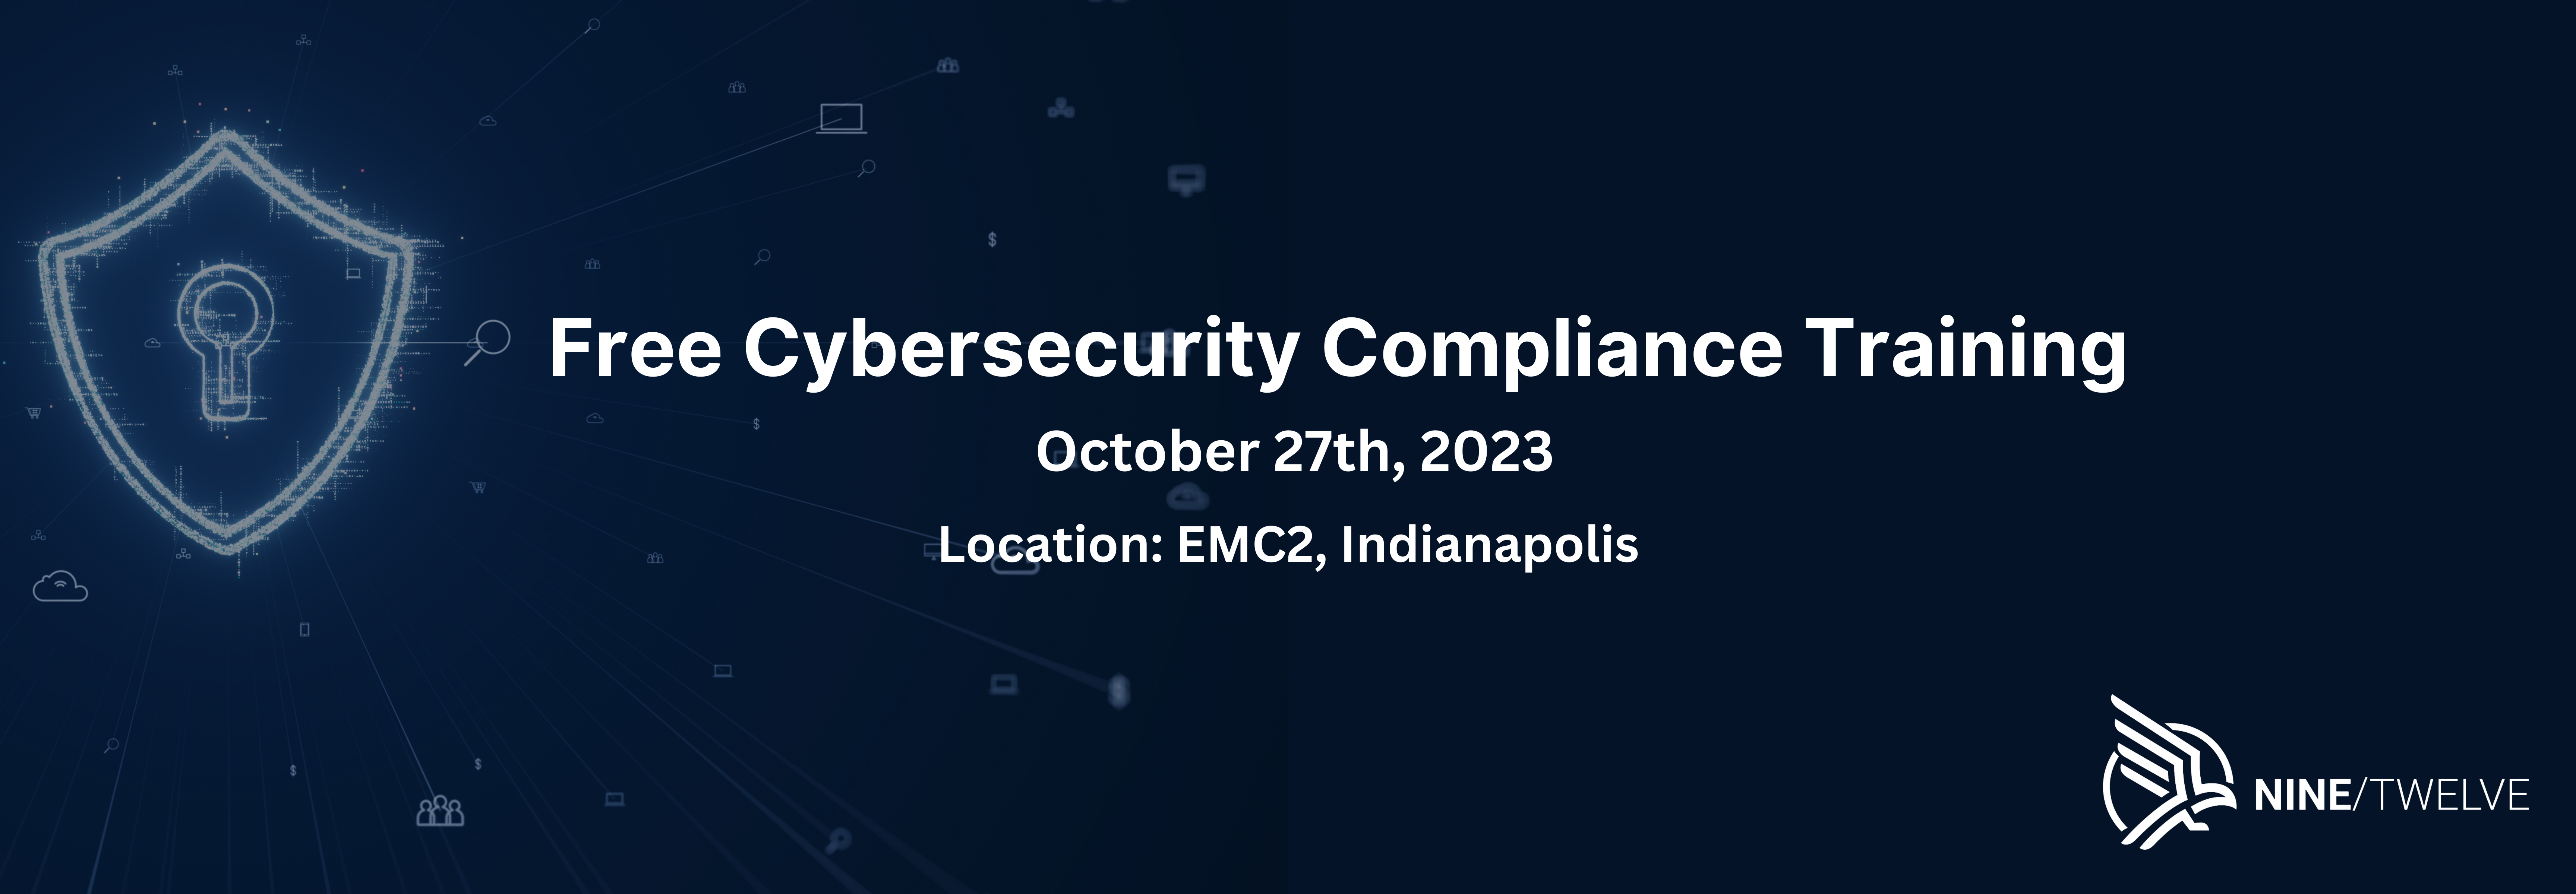 Free Cybersecurity Compliance Training at EMC2